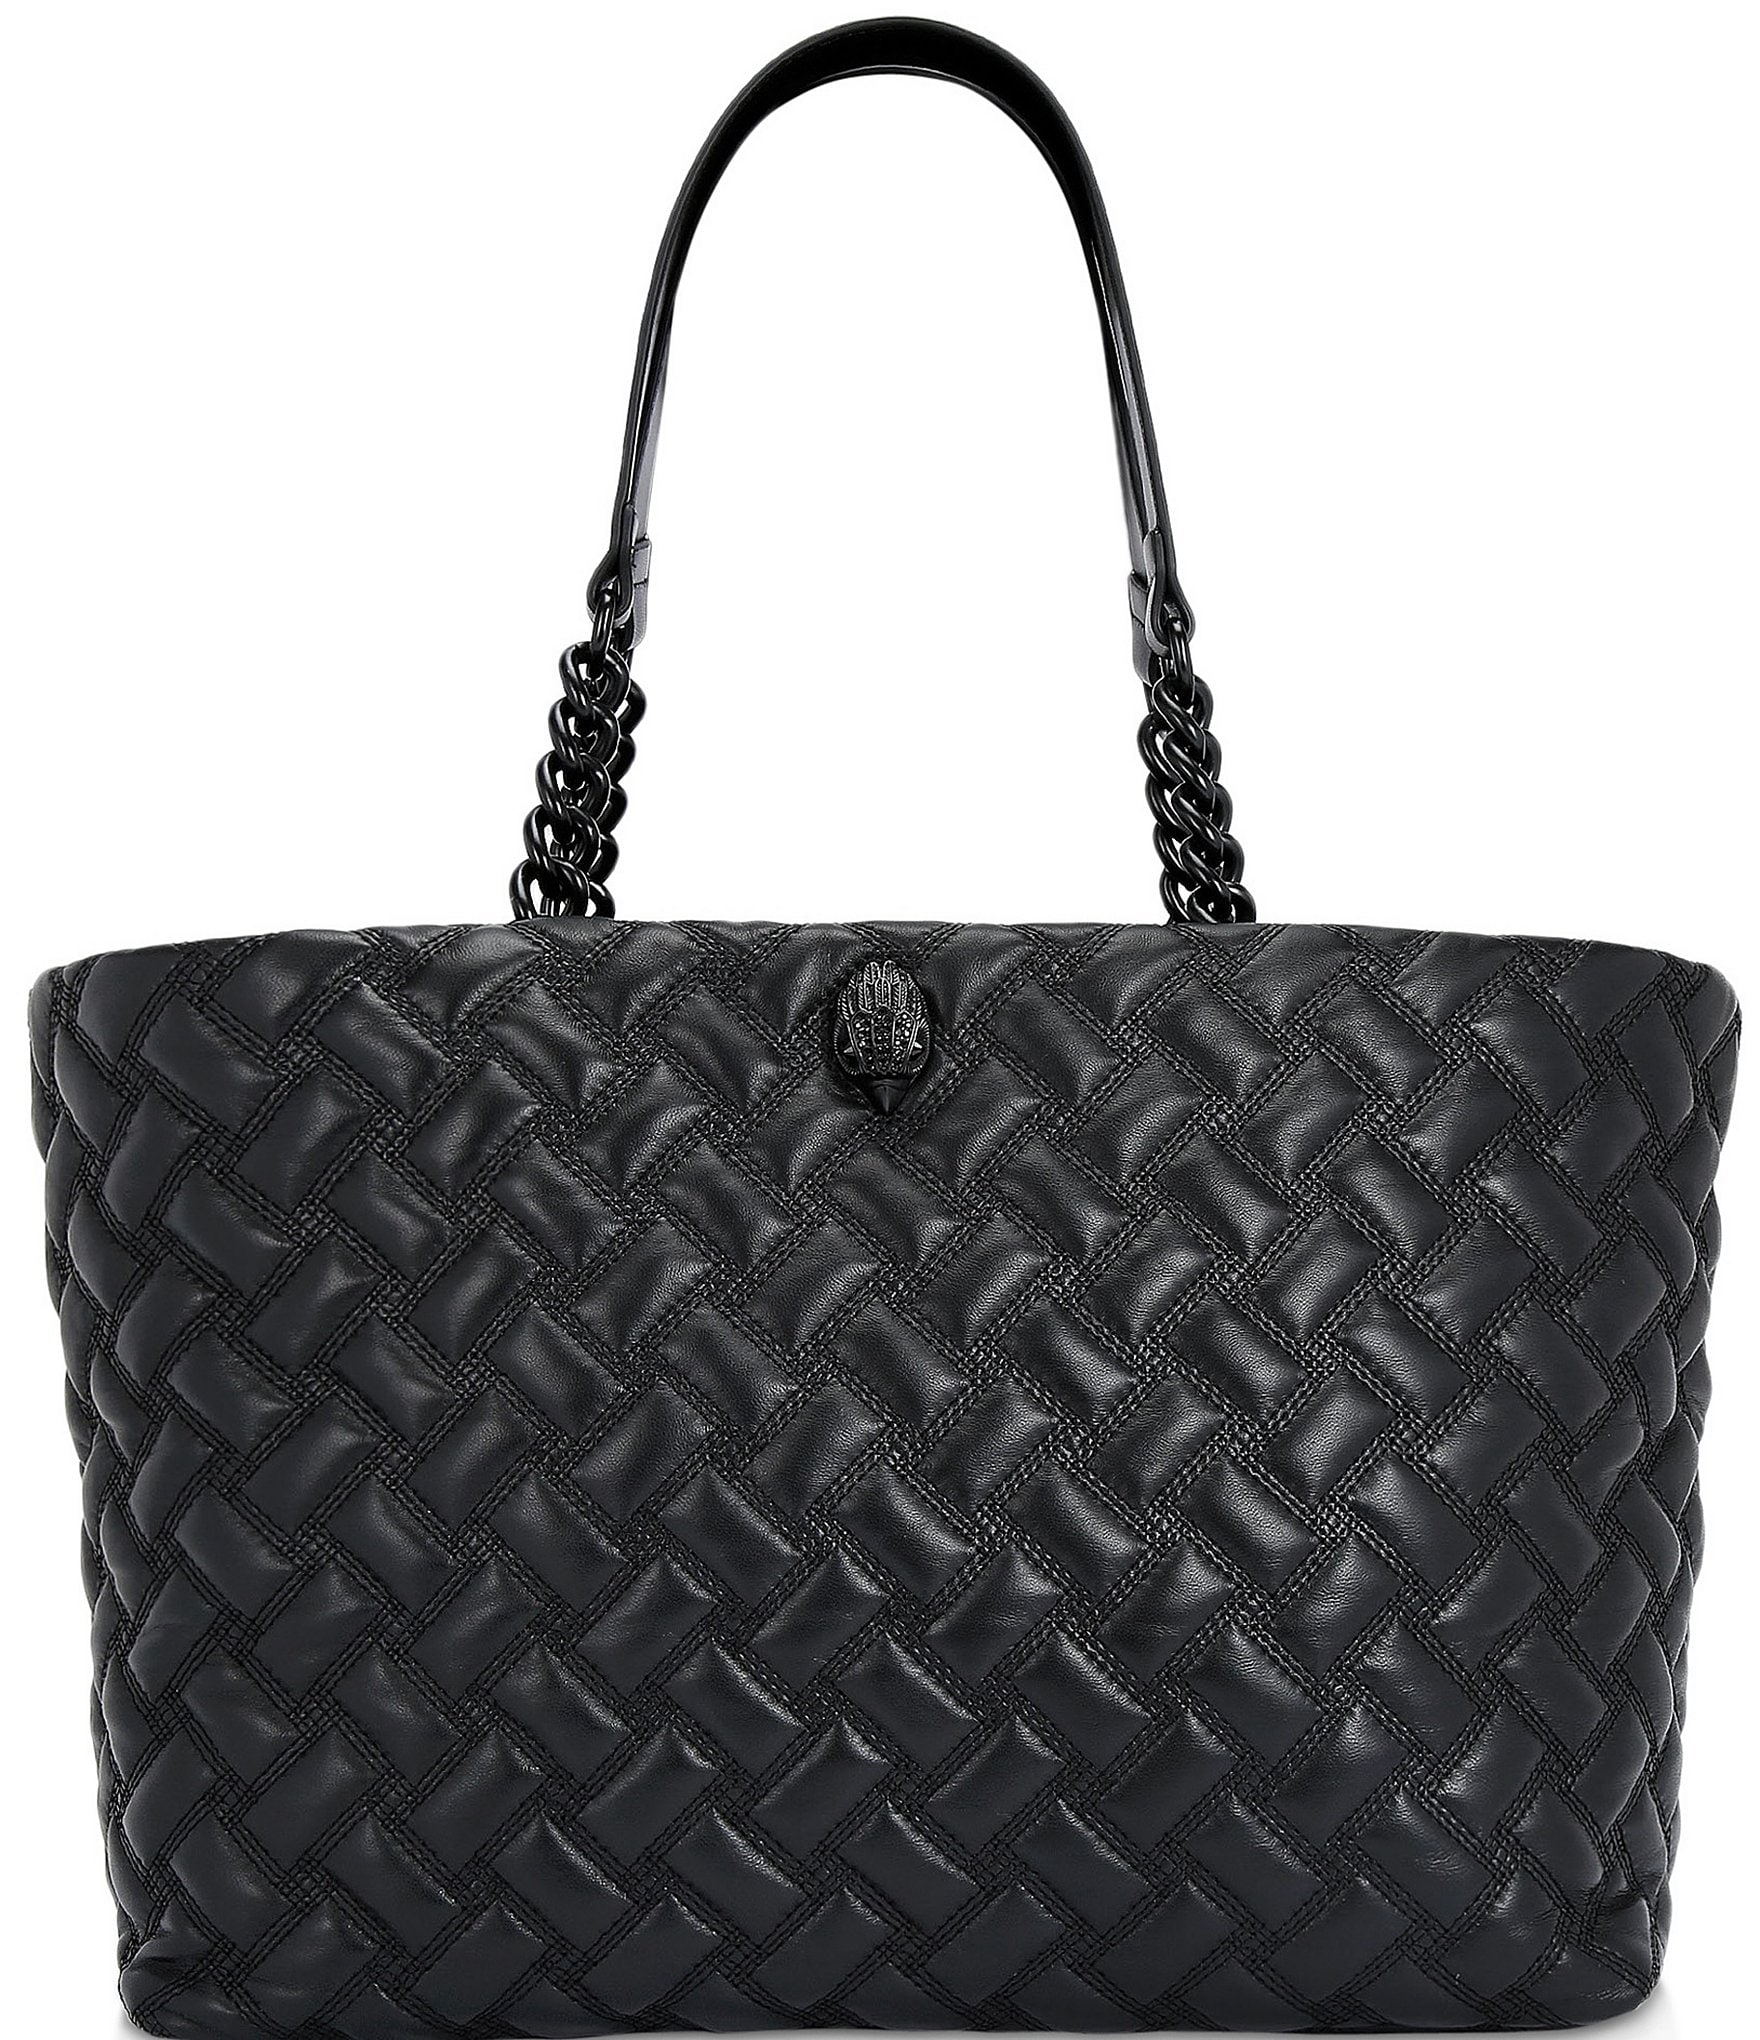 Brown Checkered Pattern Tote Bag - Shop Kendry Collection Boutique